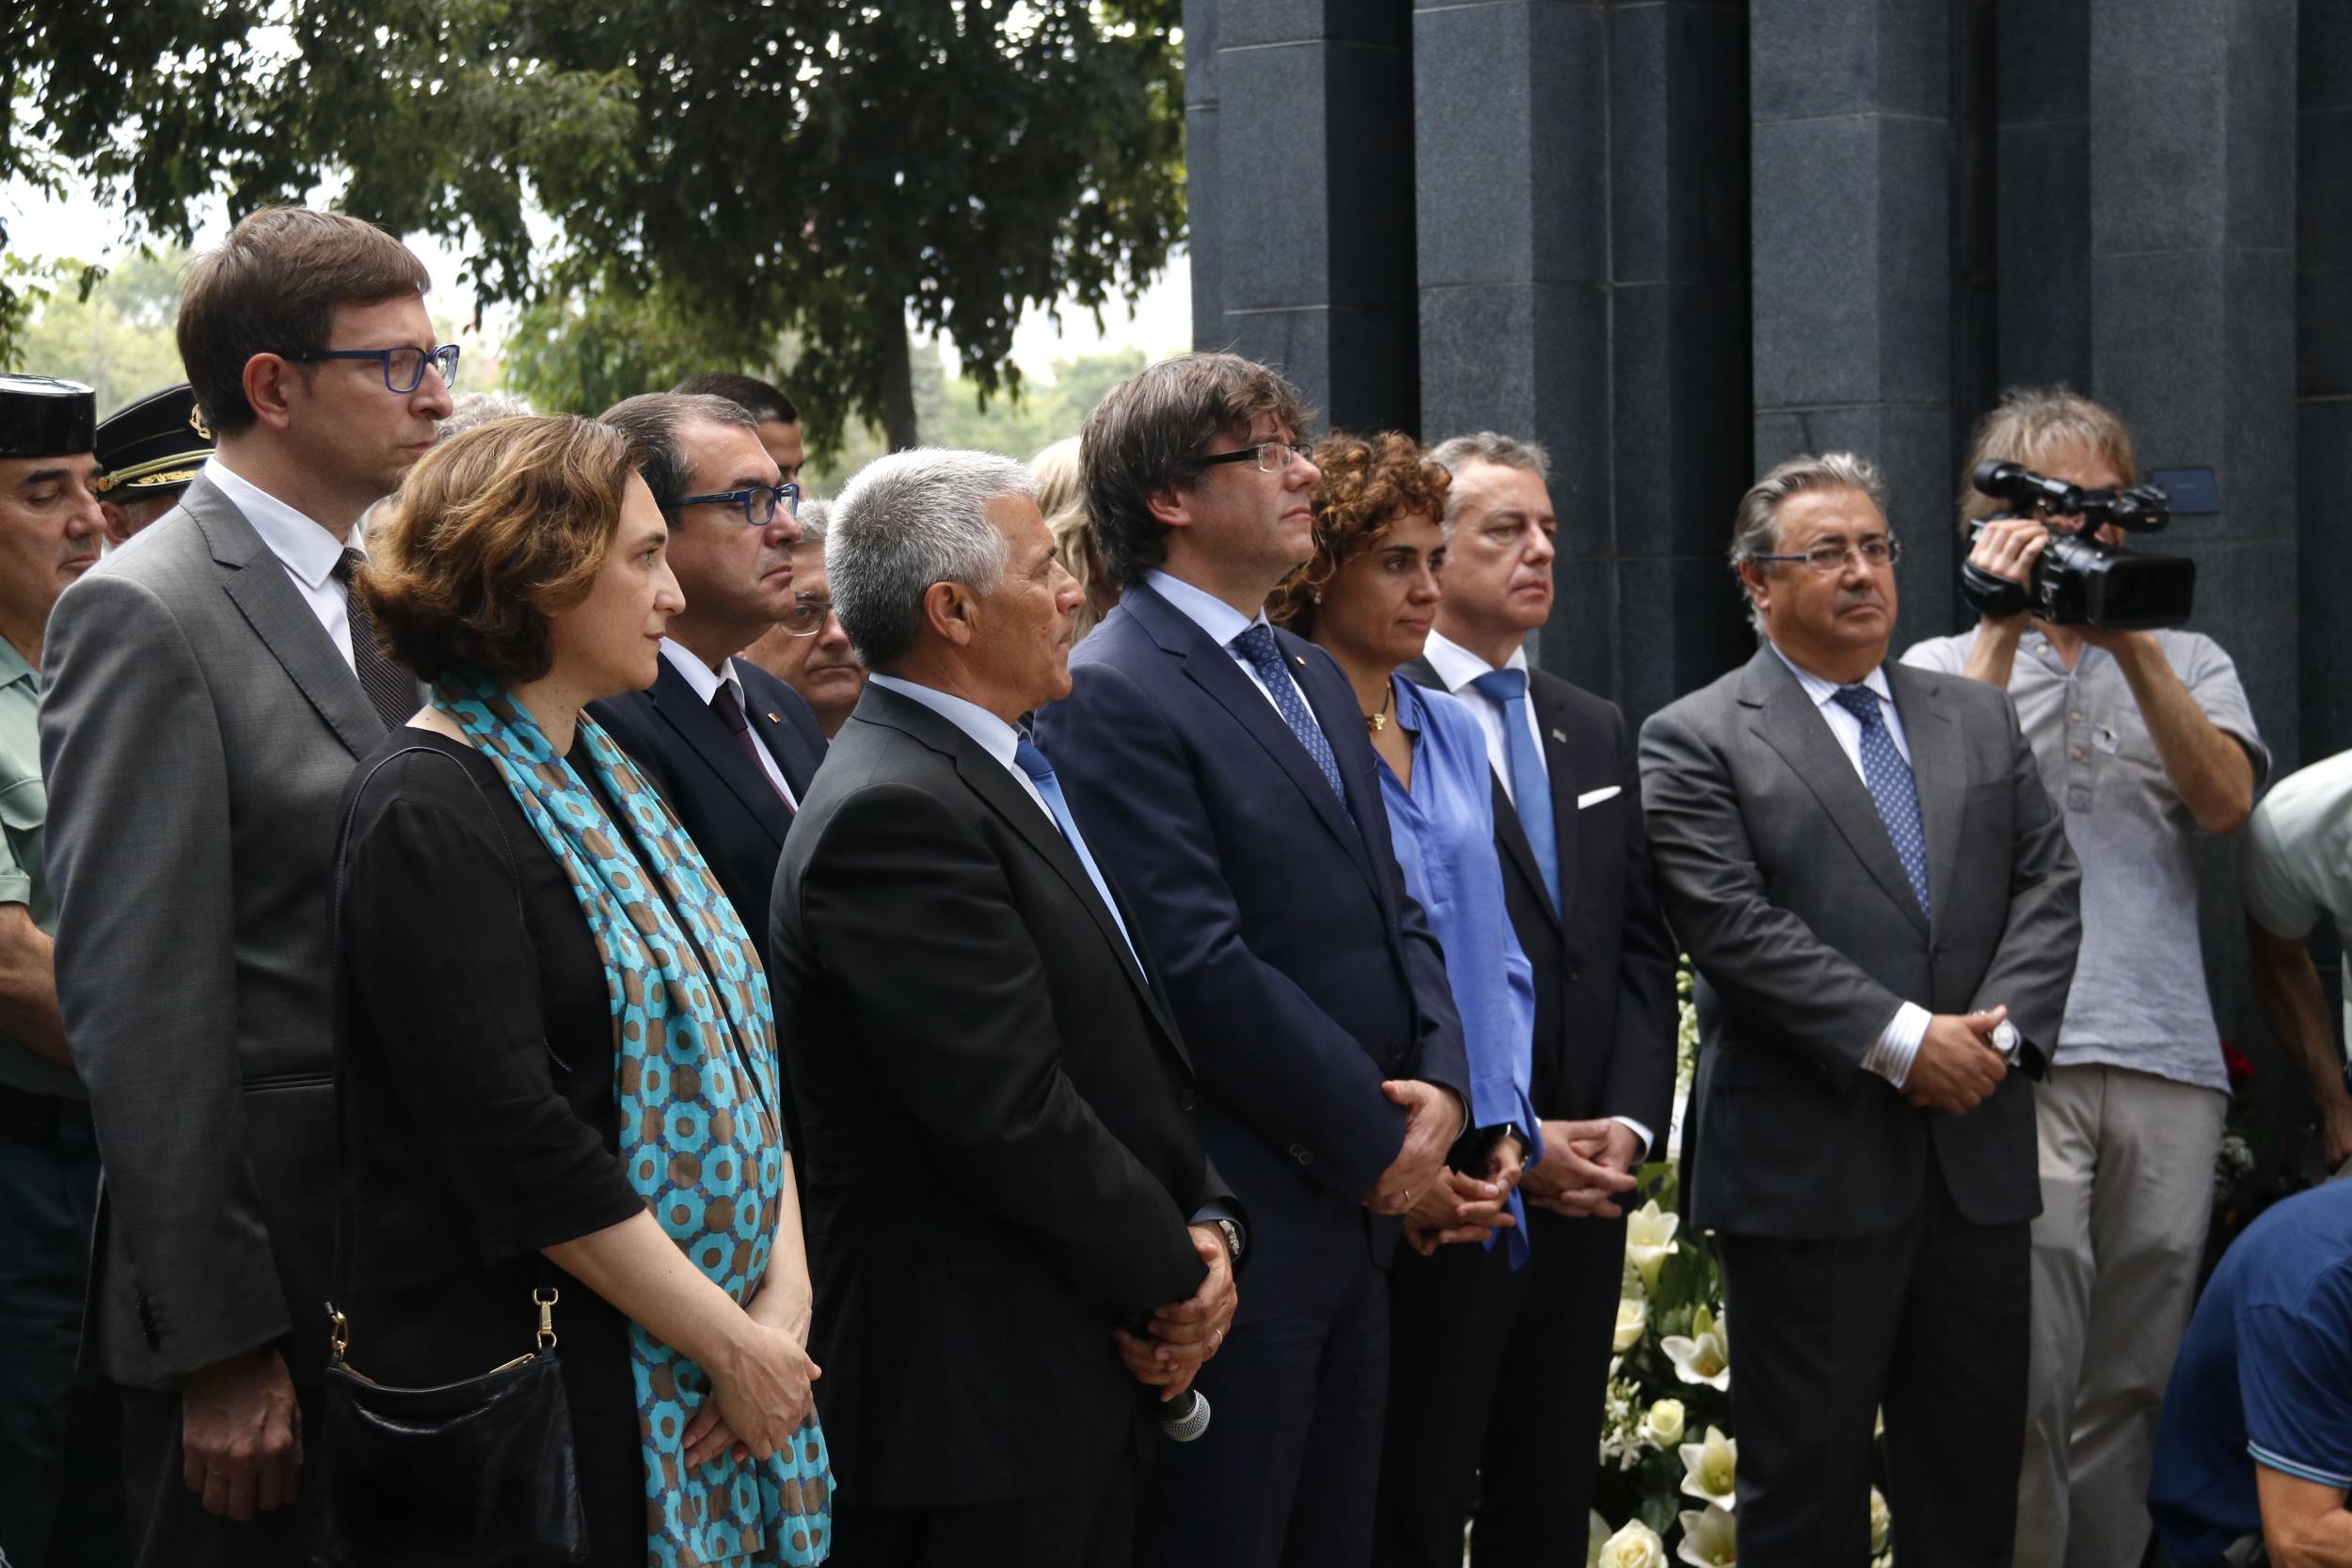 Catalan and Spanish officials at the memorial ceremony (Núria Julia)